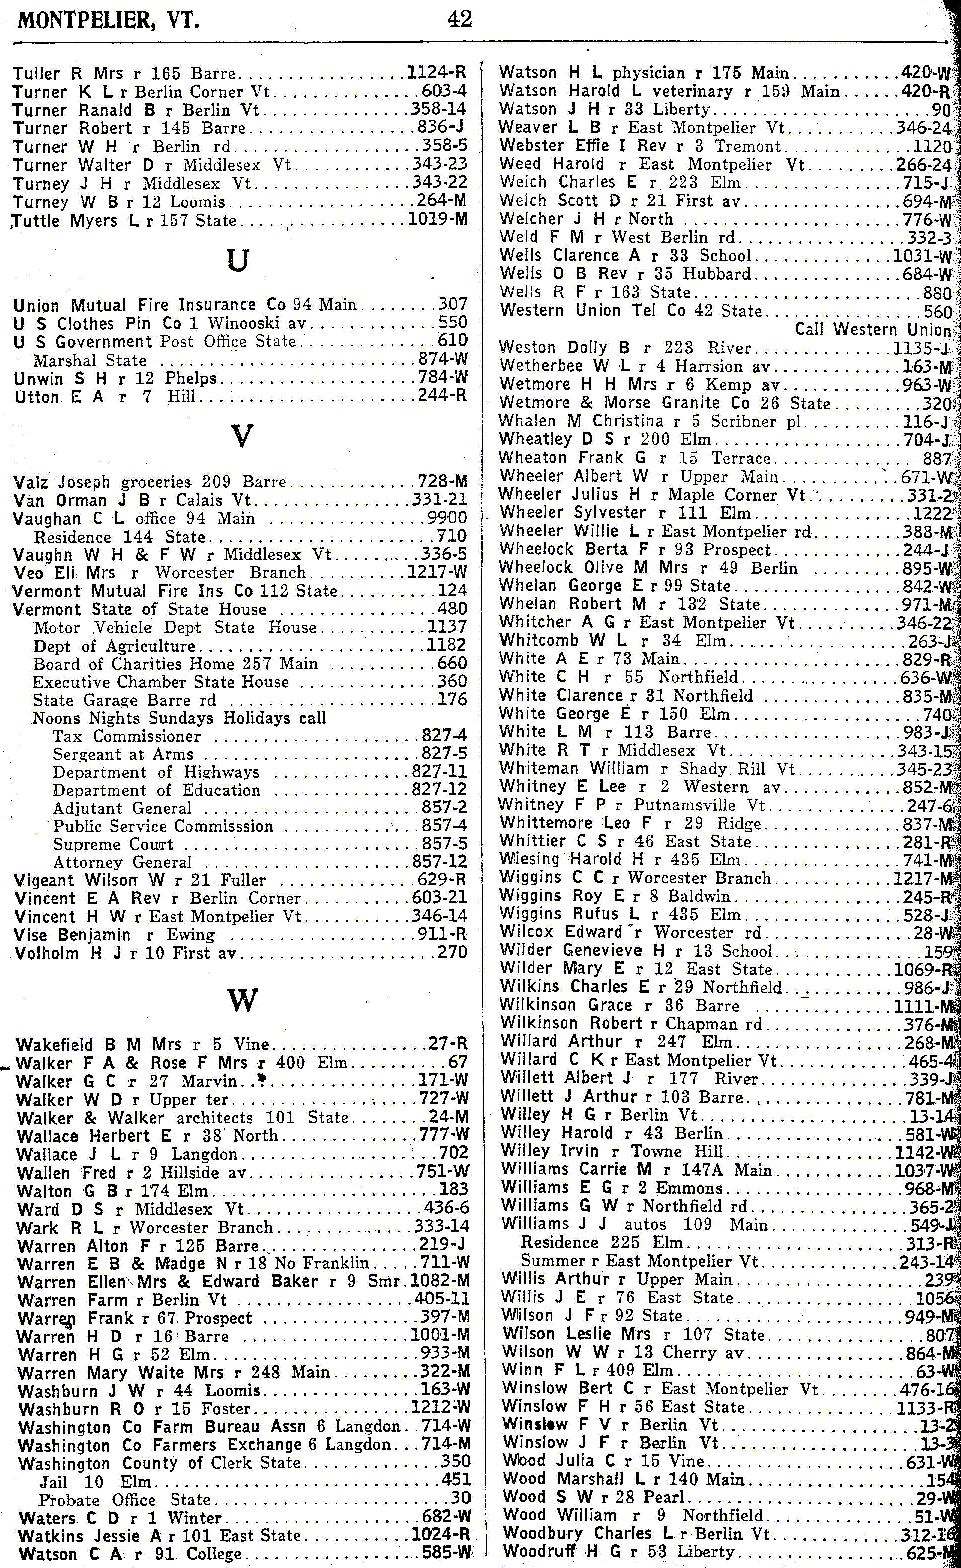 1928 Montpelier Vt Telephone Book - Page 42